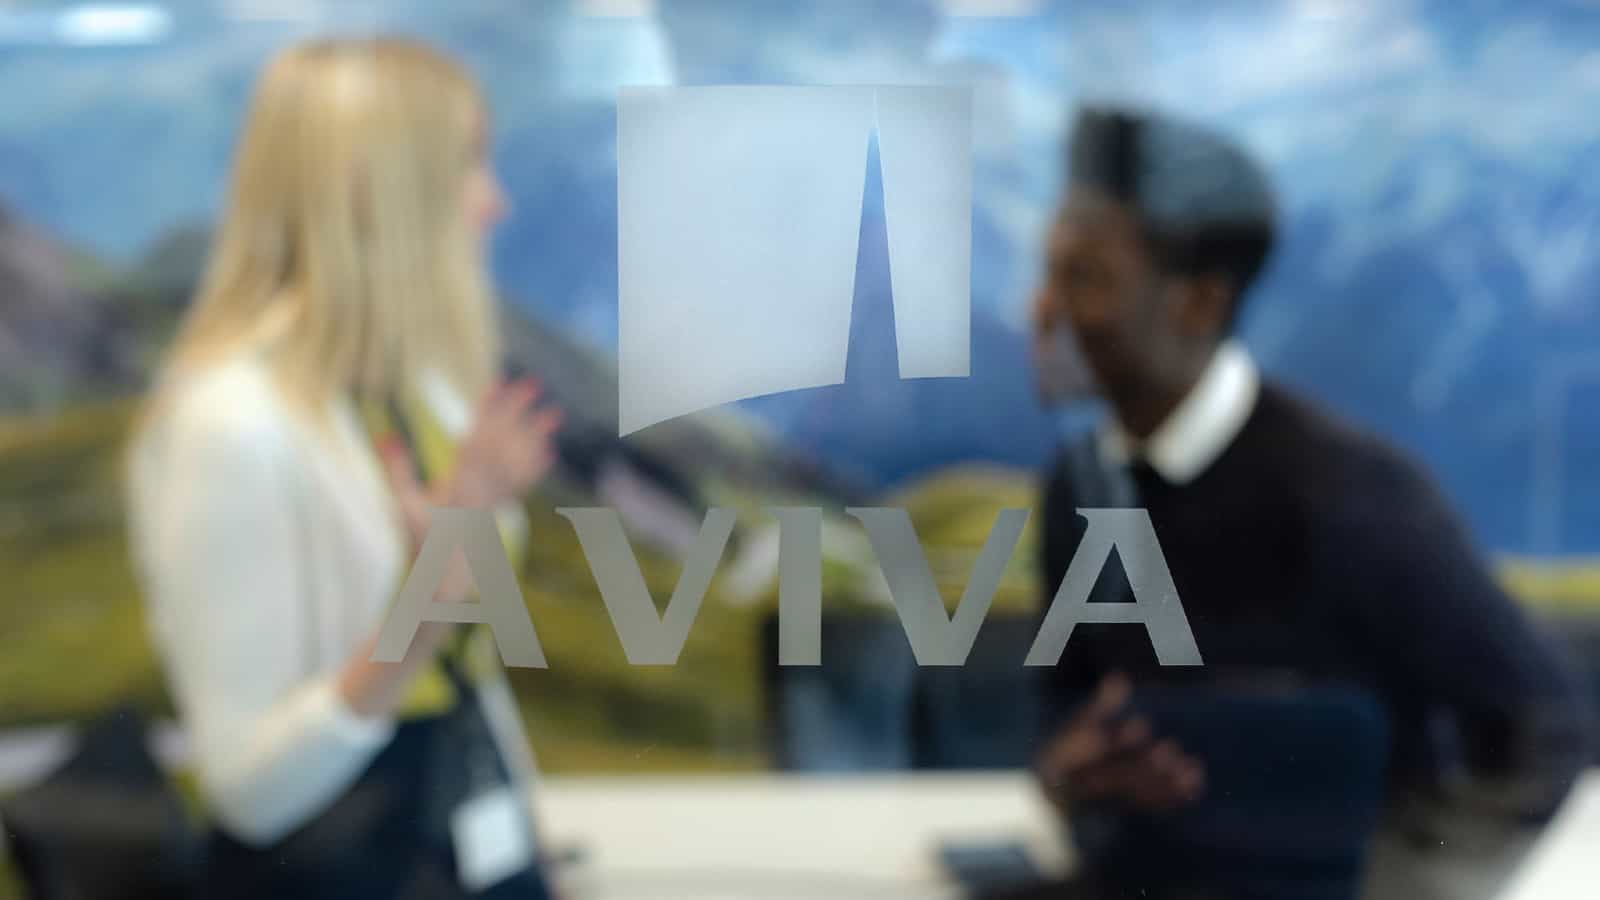 what might the recent aviva share price performance tell me as an investor?